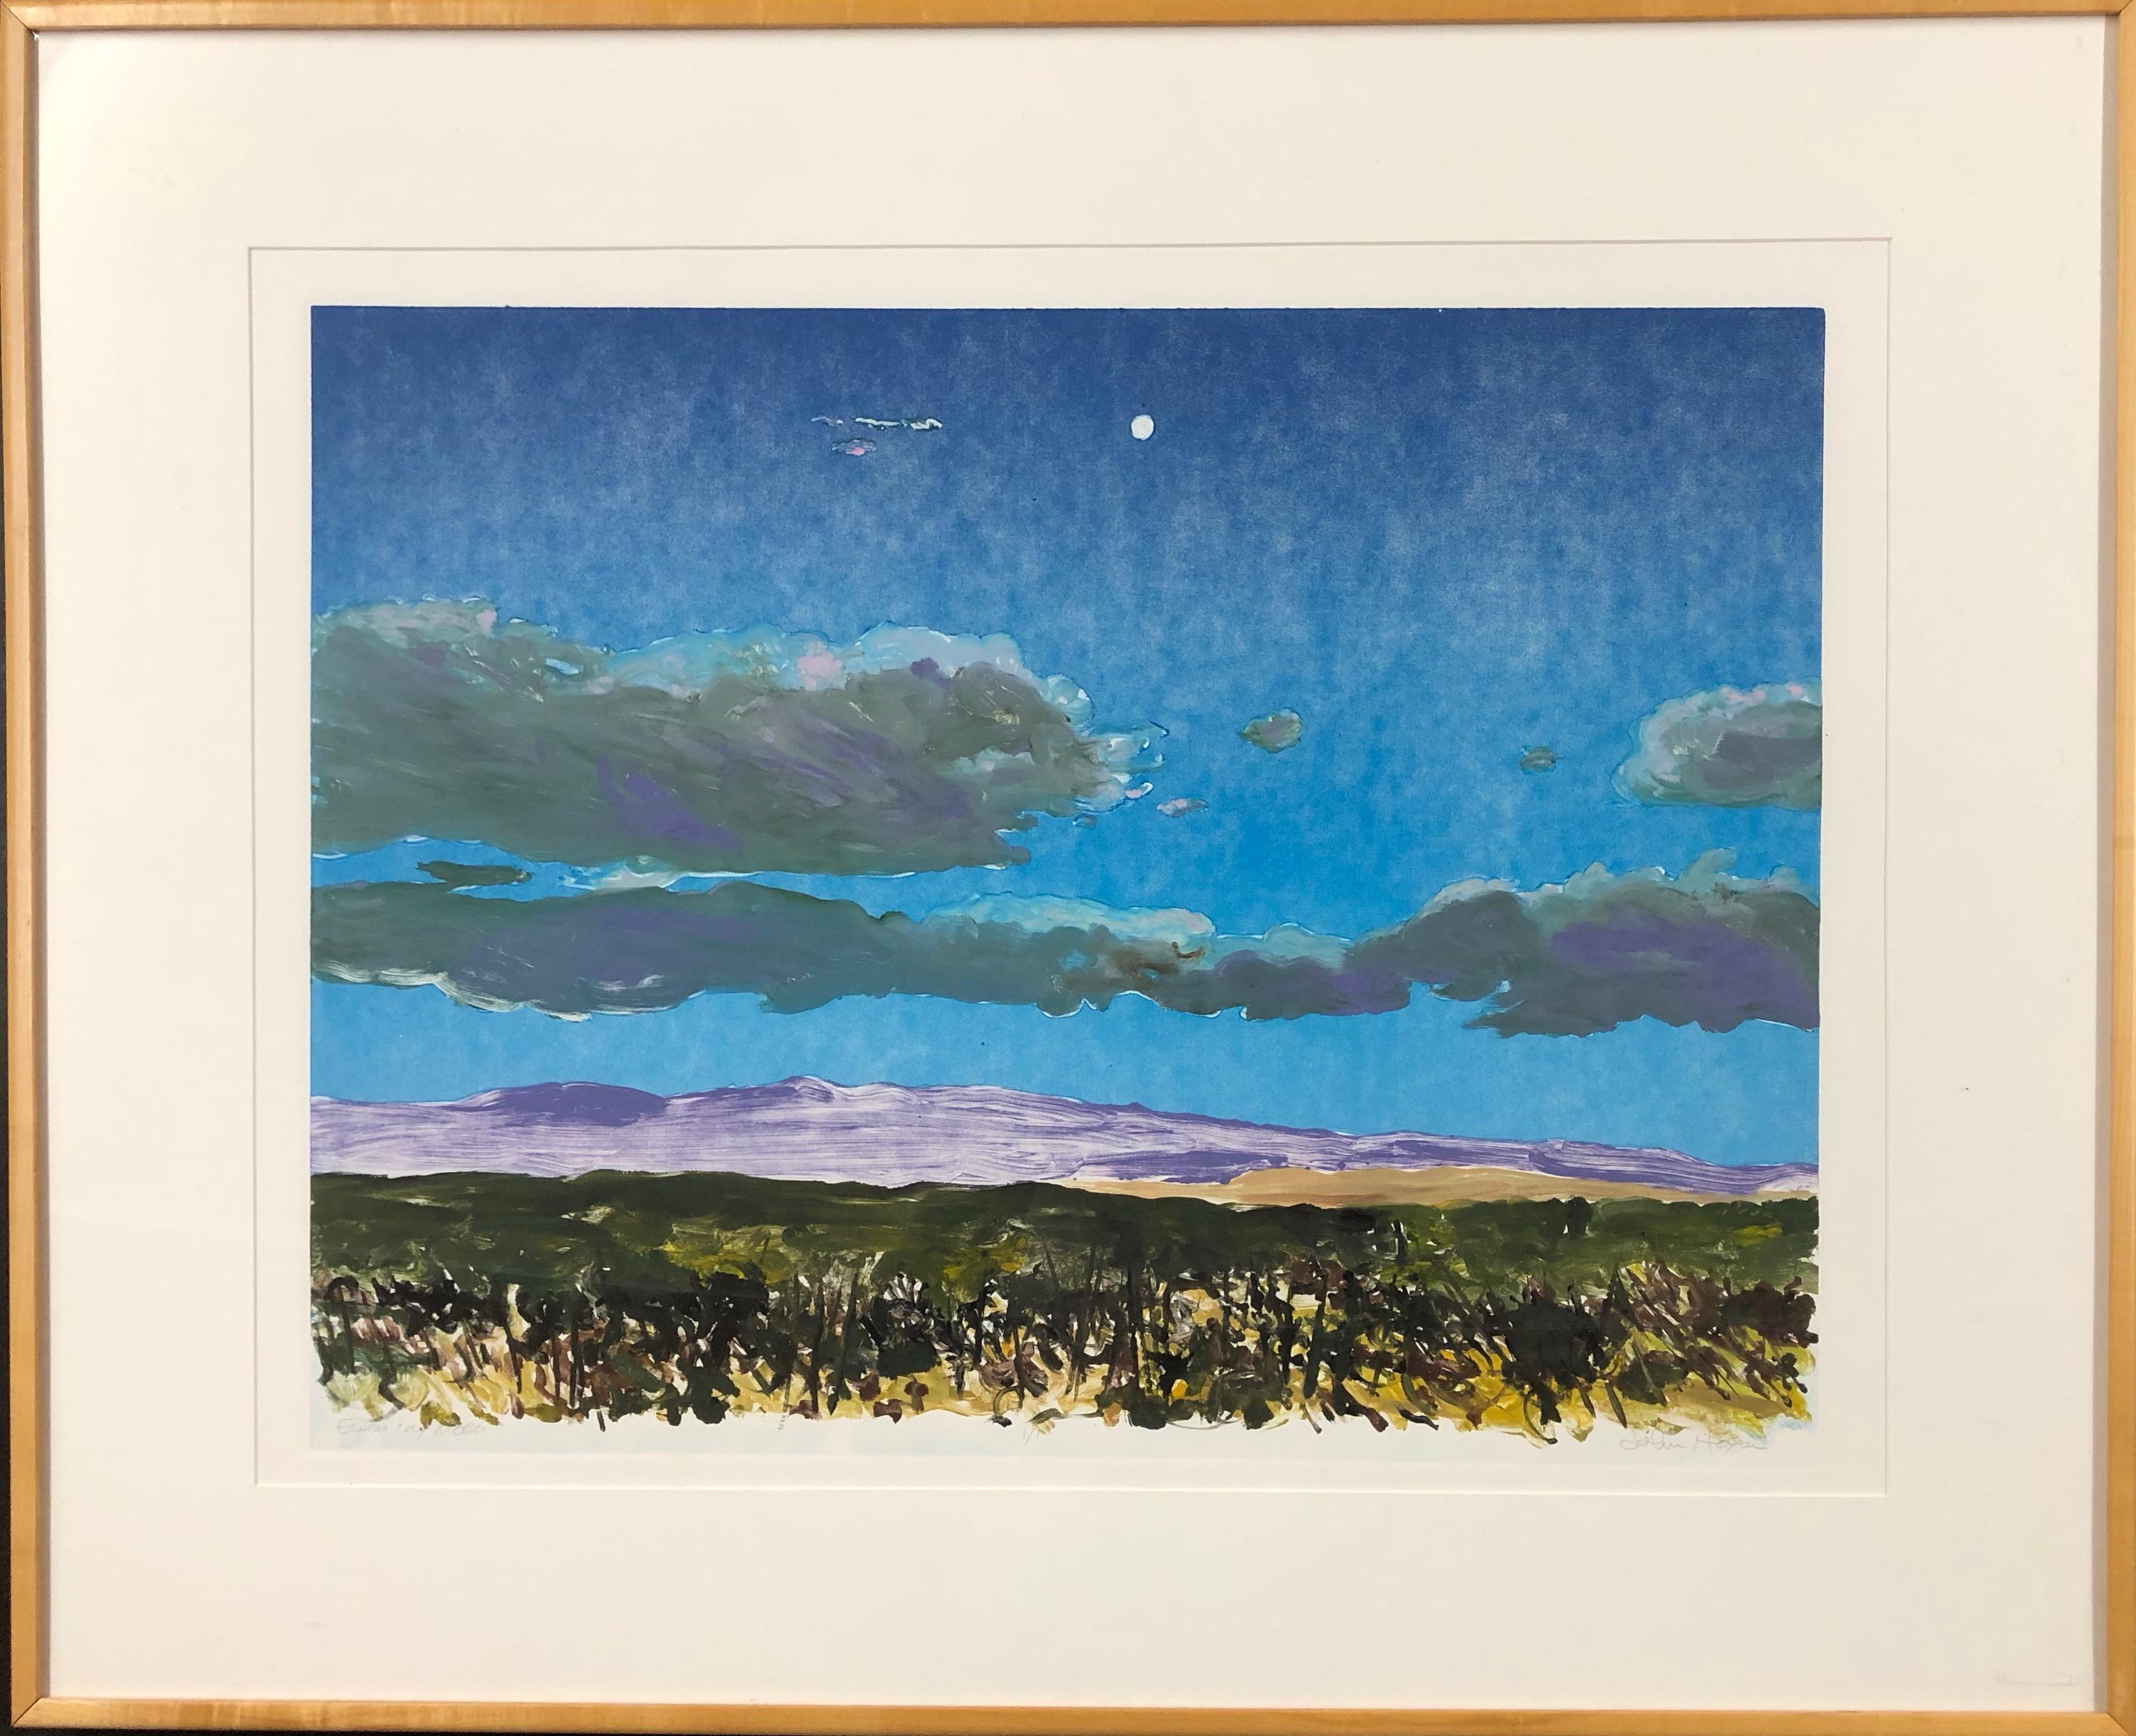 Evening Moon monotype by John Hogan, unique framed landscape with clouds